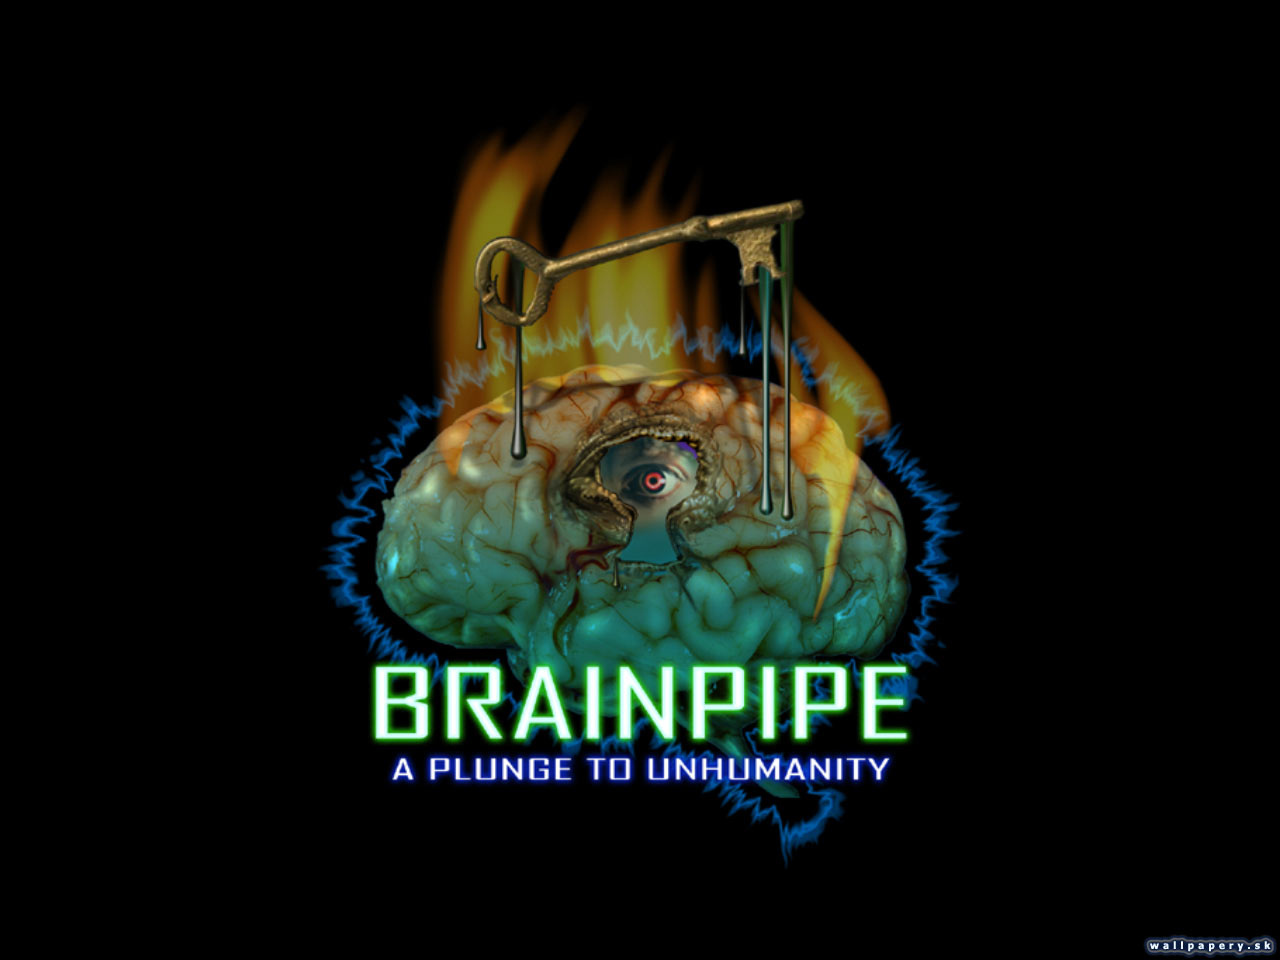 Brainpipe: A Plunge to Unhumanity - wallpaper 1